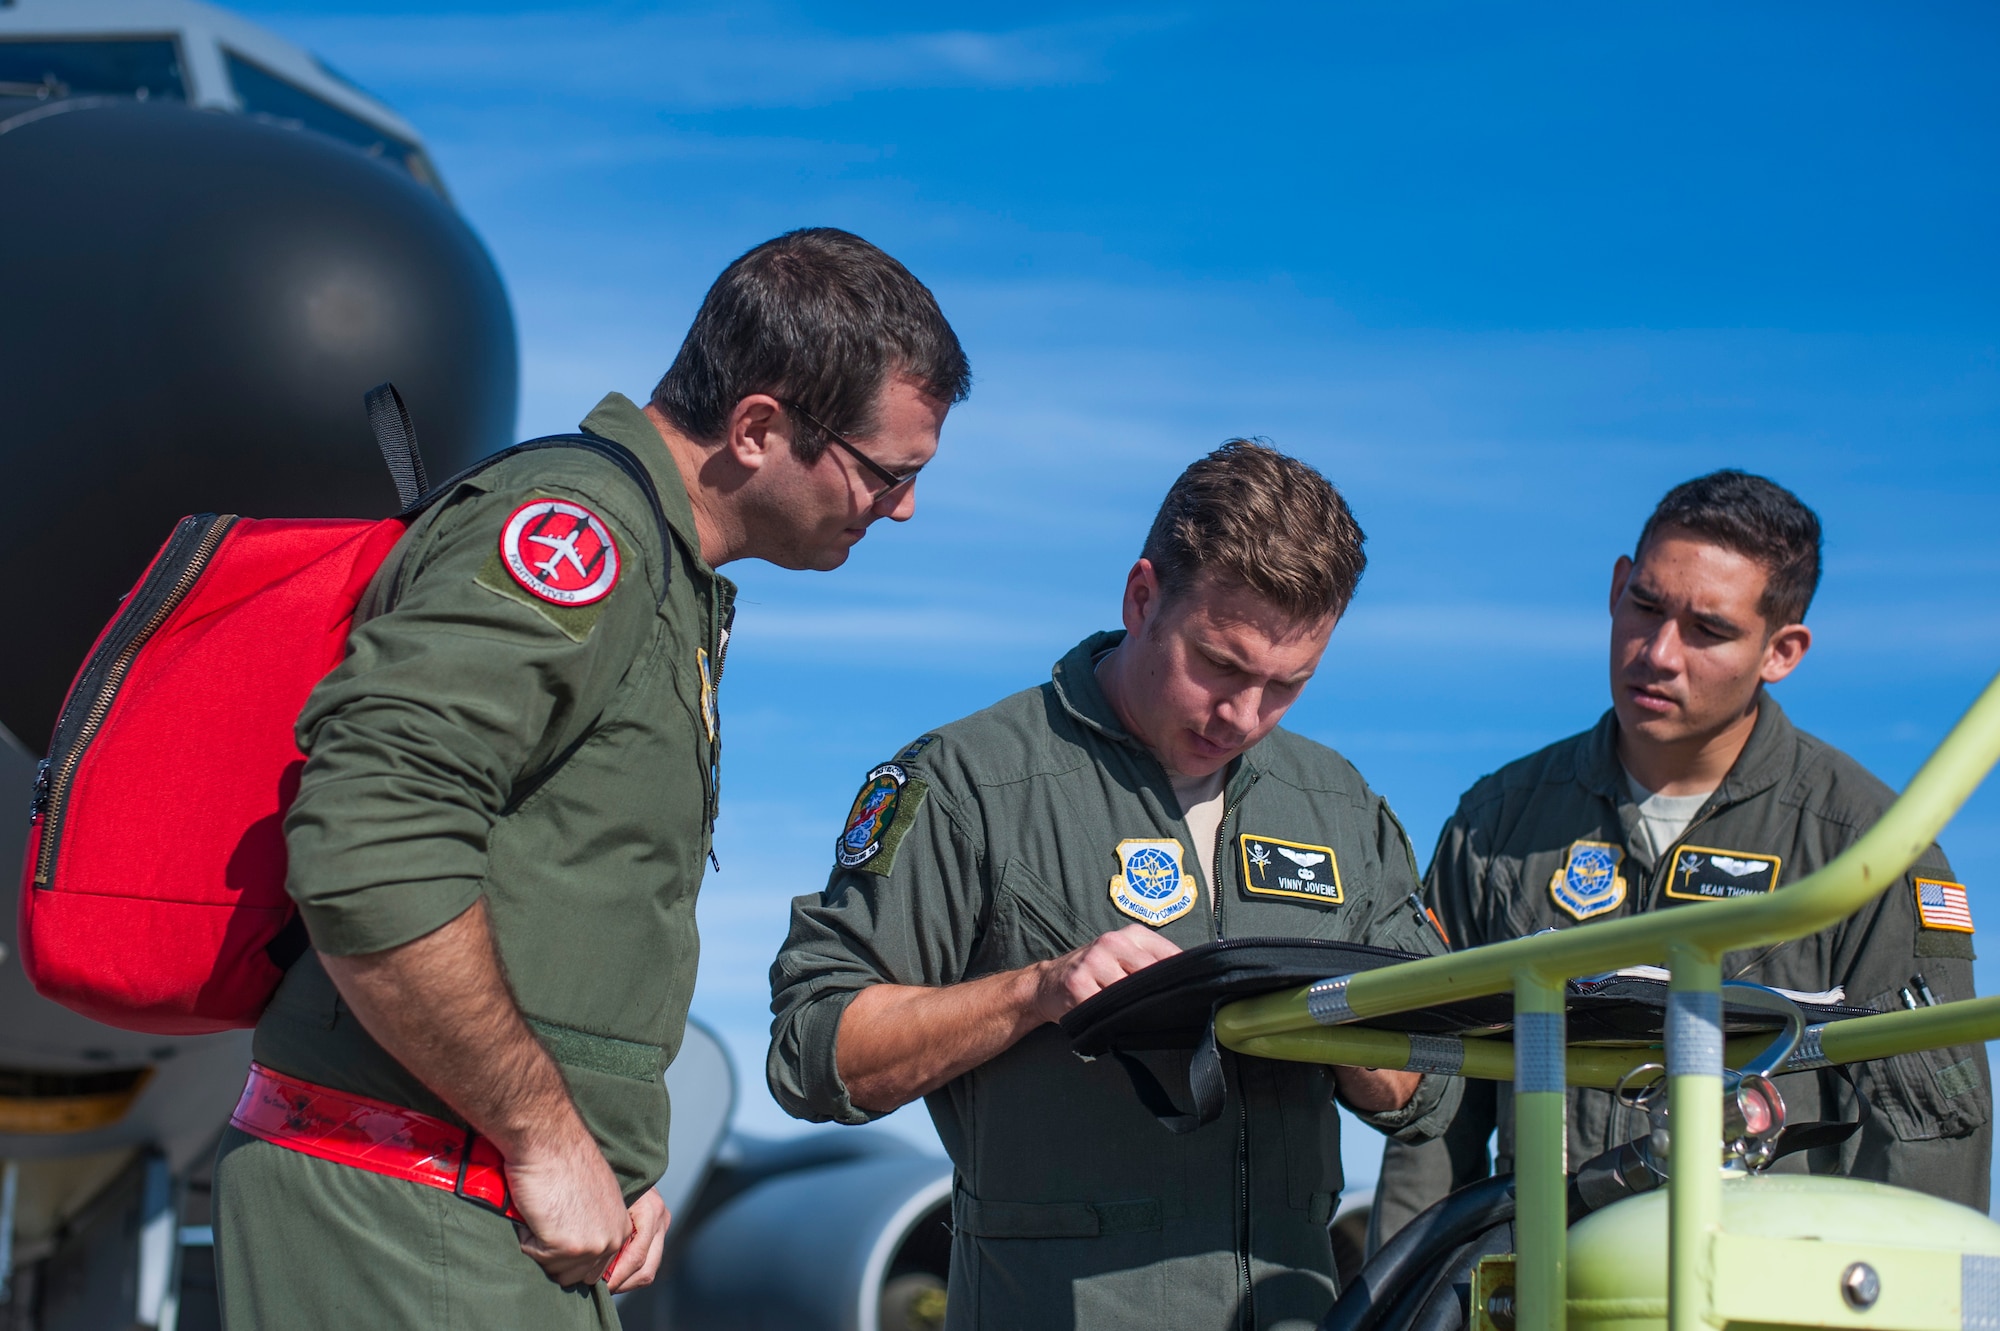 Aircrew members assigned to the 6th Air Mobility Wing go over their pre-flight checklist before a refueling mission supporting Exercise Emerald Warrior, Jan. 17, 2019 at MacDill Air Force Base, Fla.